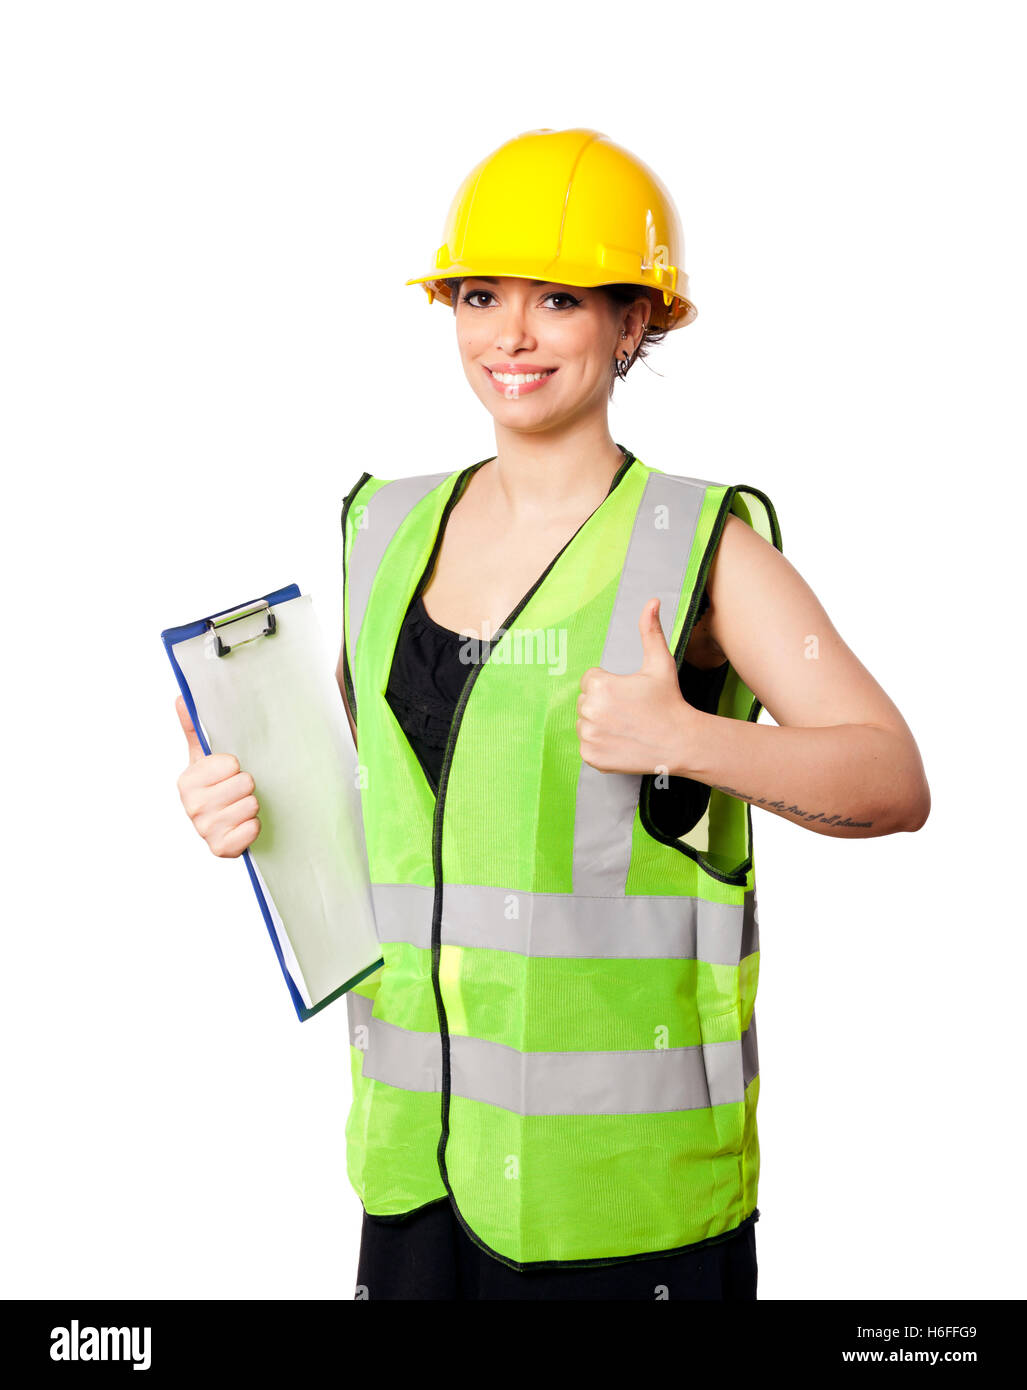 Young adult woman in her mid 20s wearing reflective yellow safety helmet and safety vest, giving the camera a smile and the thum Stock Photo